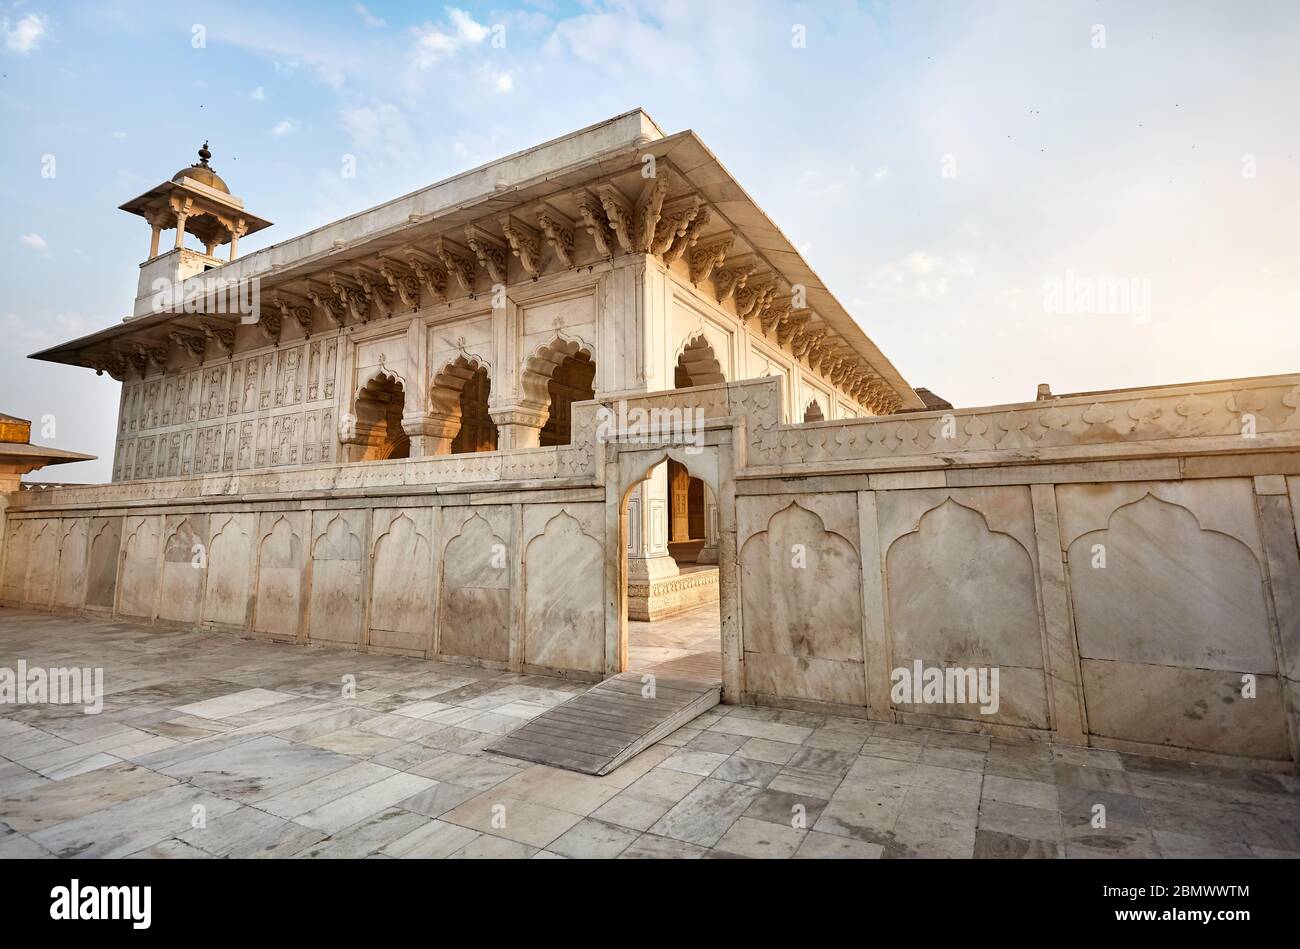 Khas Mahal palace from marble in Agra Fort at sunset in India Stock Photo